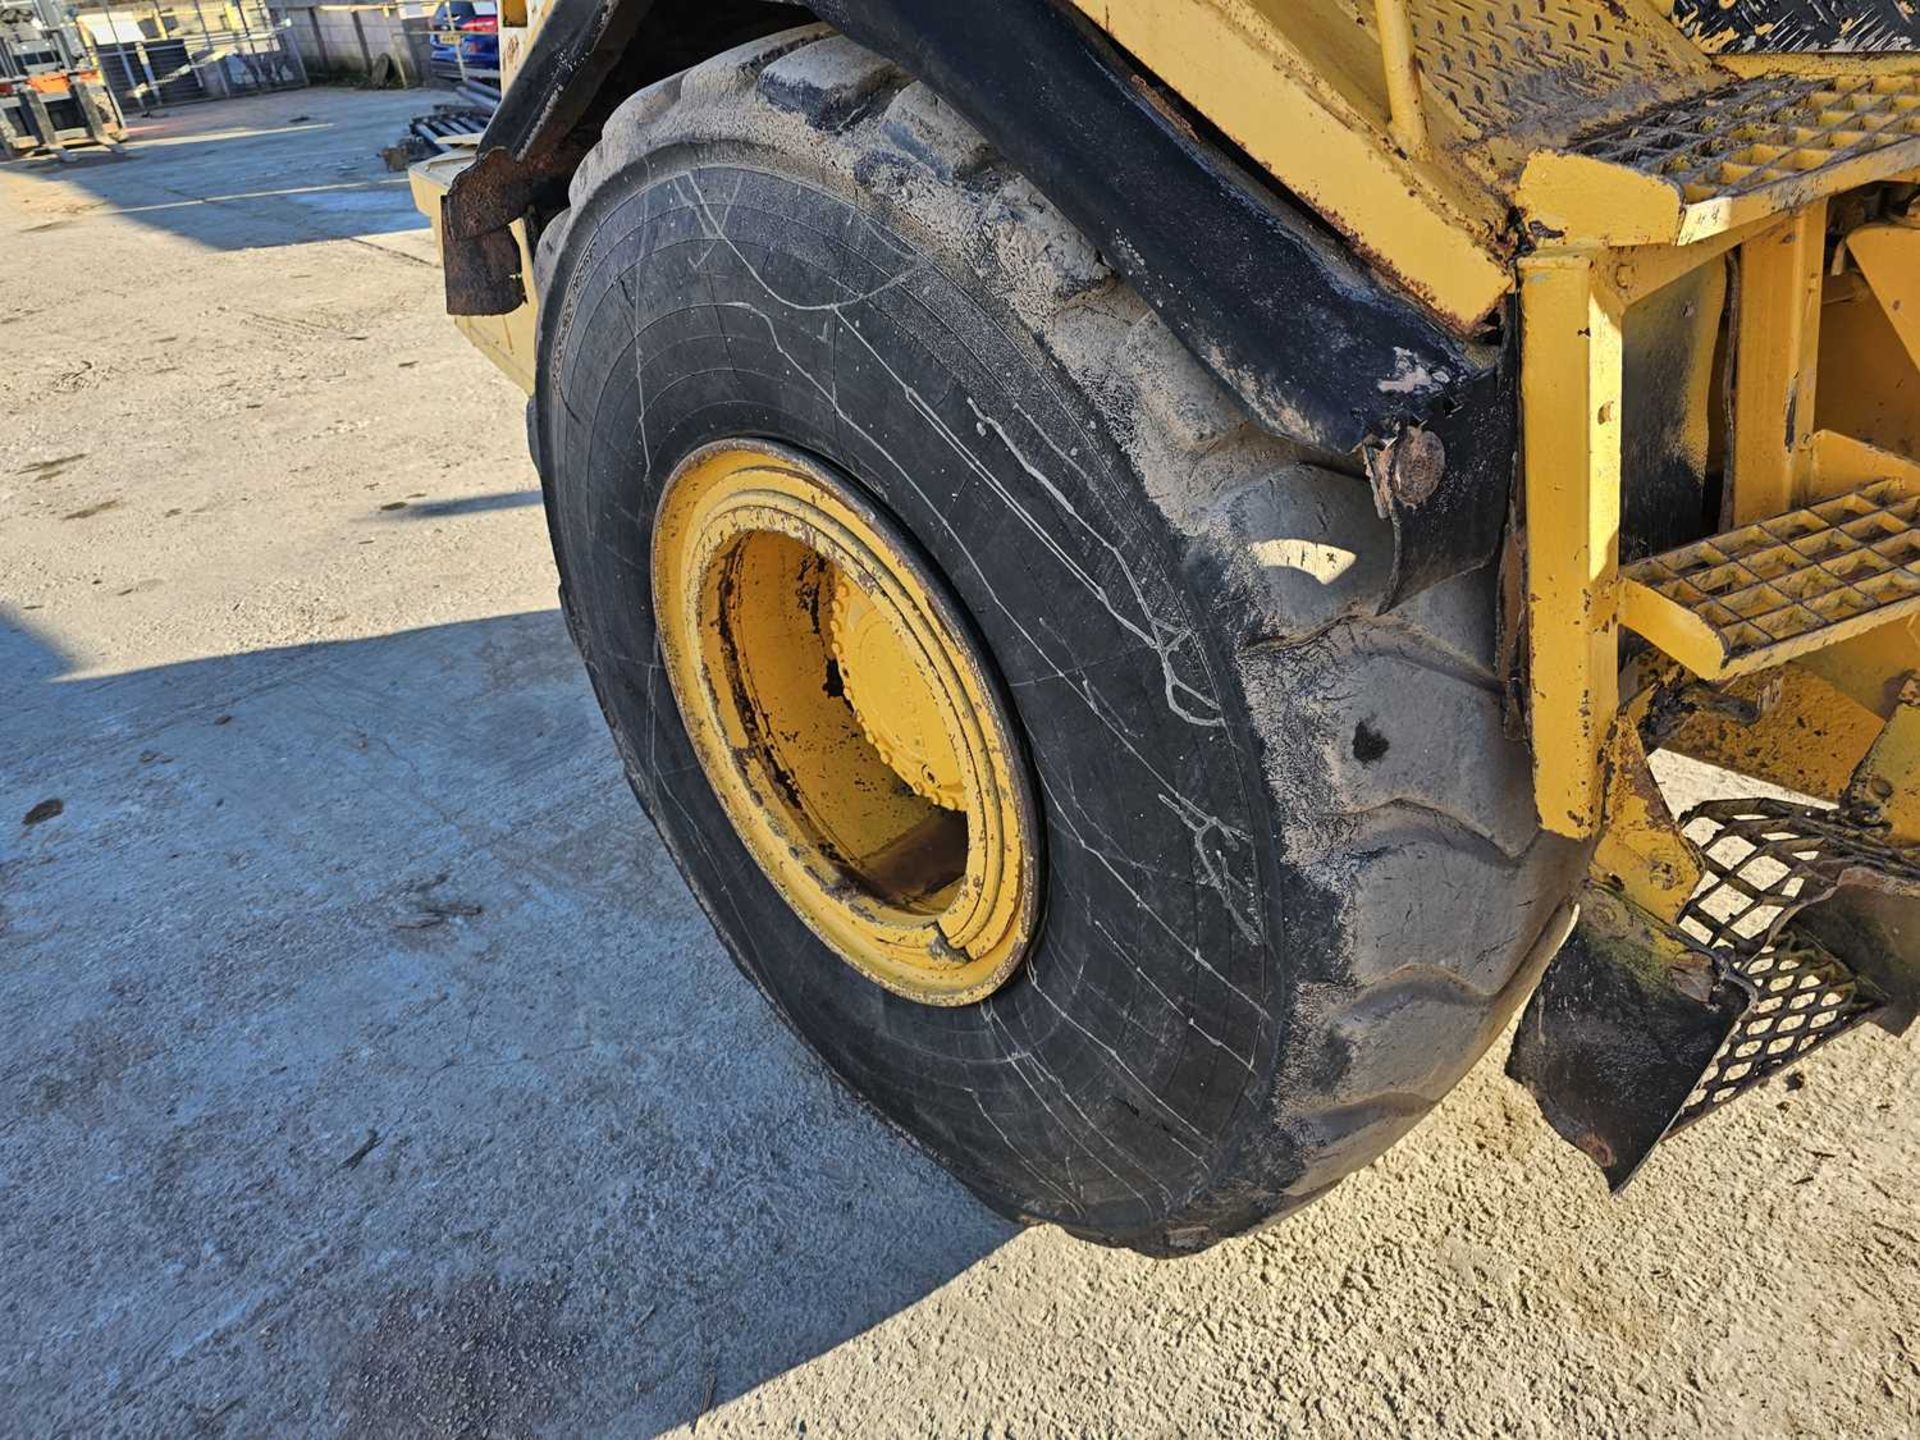 Volvo A25 6x6 Articulated Dumptruck, Reverse Camera - Image 21 of 27